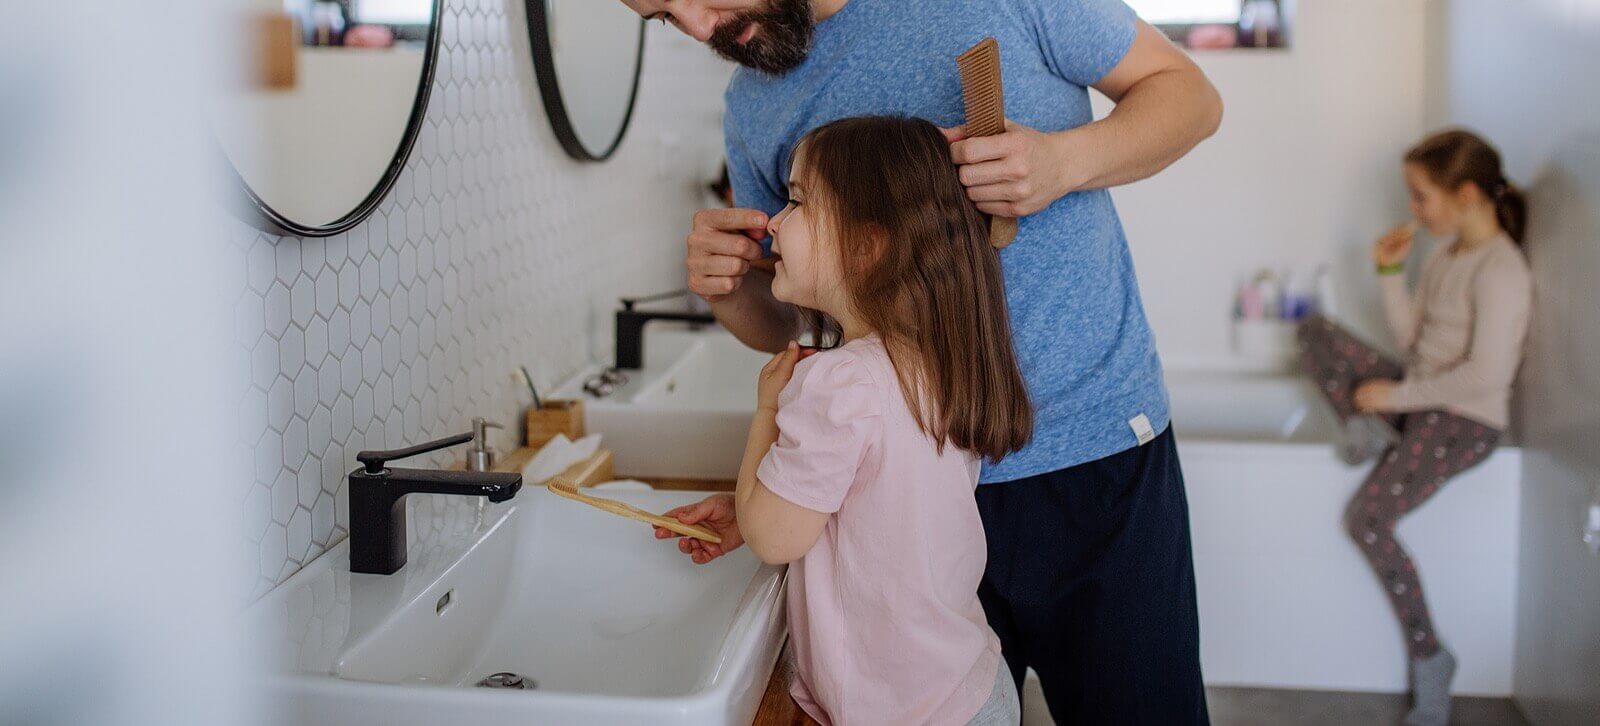 Image of a dad doing his daughters hair in the bathroom. Showing that connection that can be formed in family therapy in Reading, PA. A family therapist can improve the bond of parent and child in family counseling whether in Wyomissing, Reading, or anywhere in Pennsylvania.